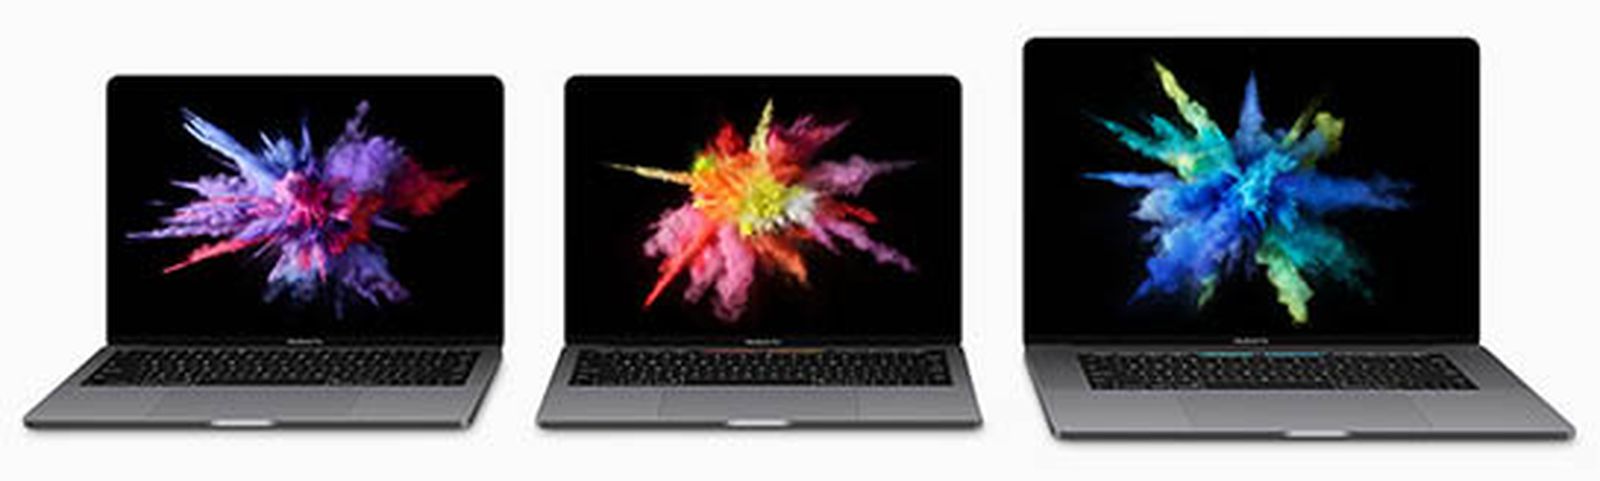 MacBook Pro Users Express Concerns About Limited Battery - MacRumors